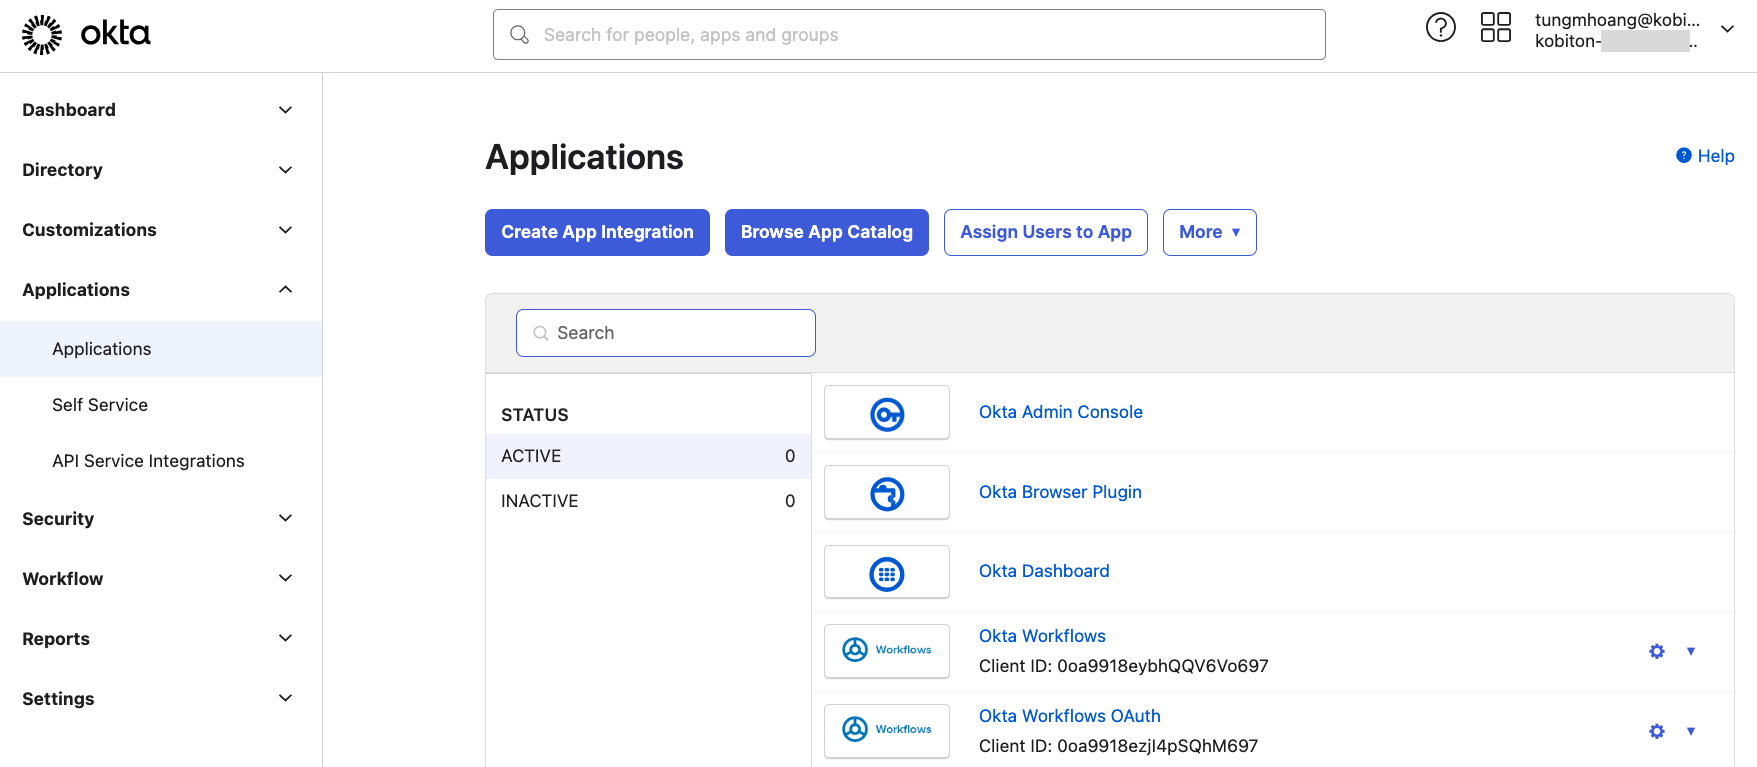 The Applications page with the Create App Integration option